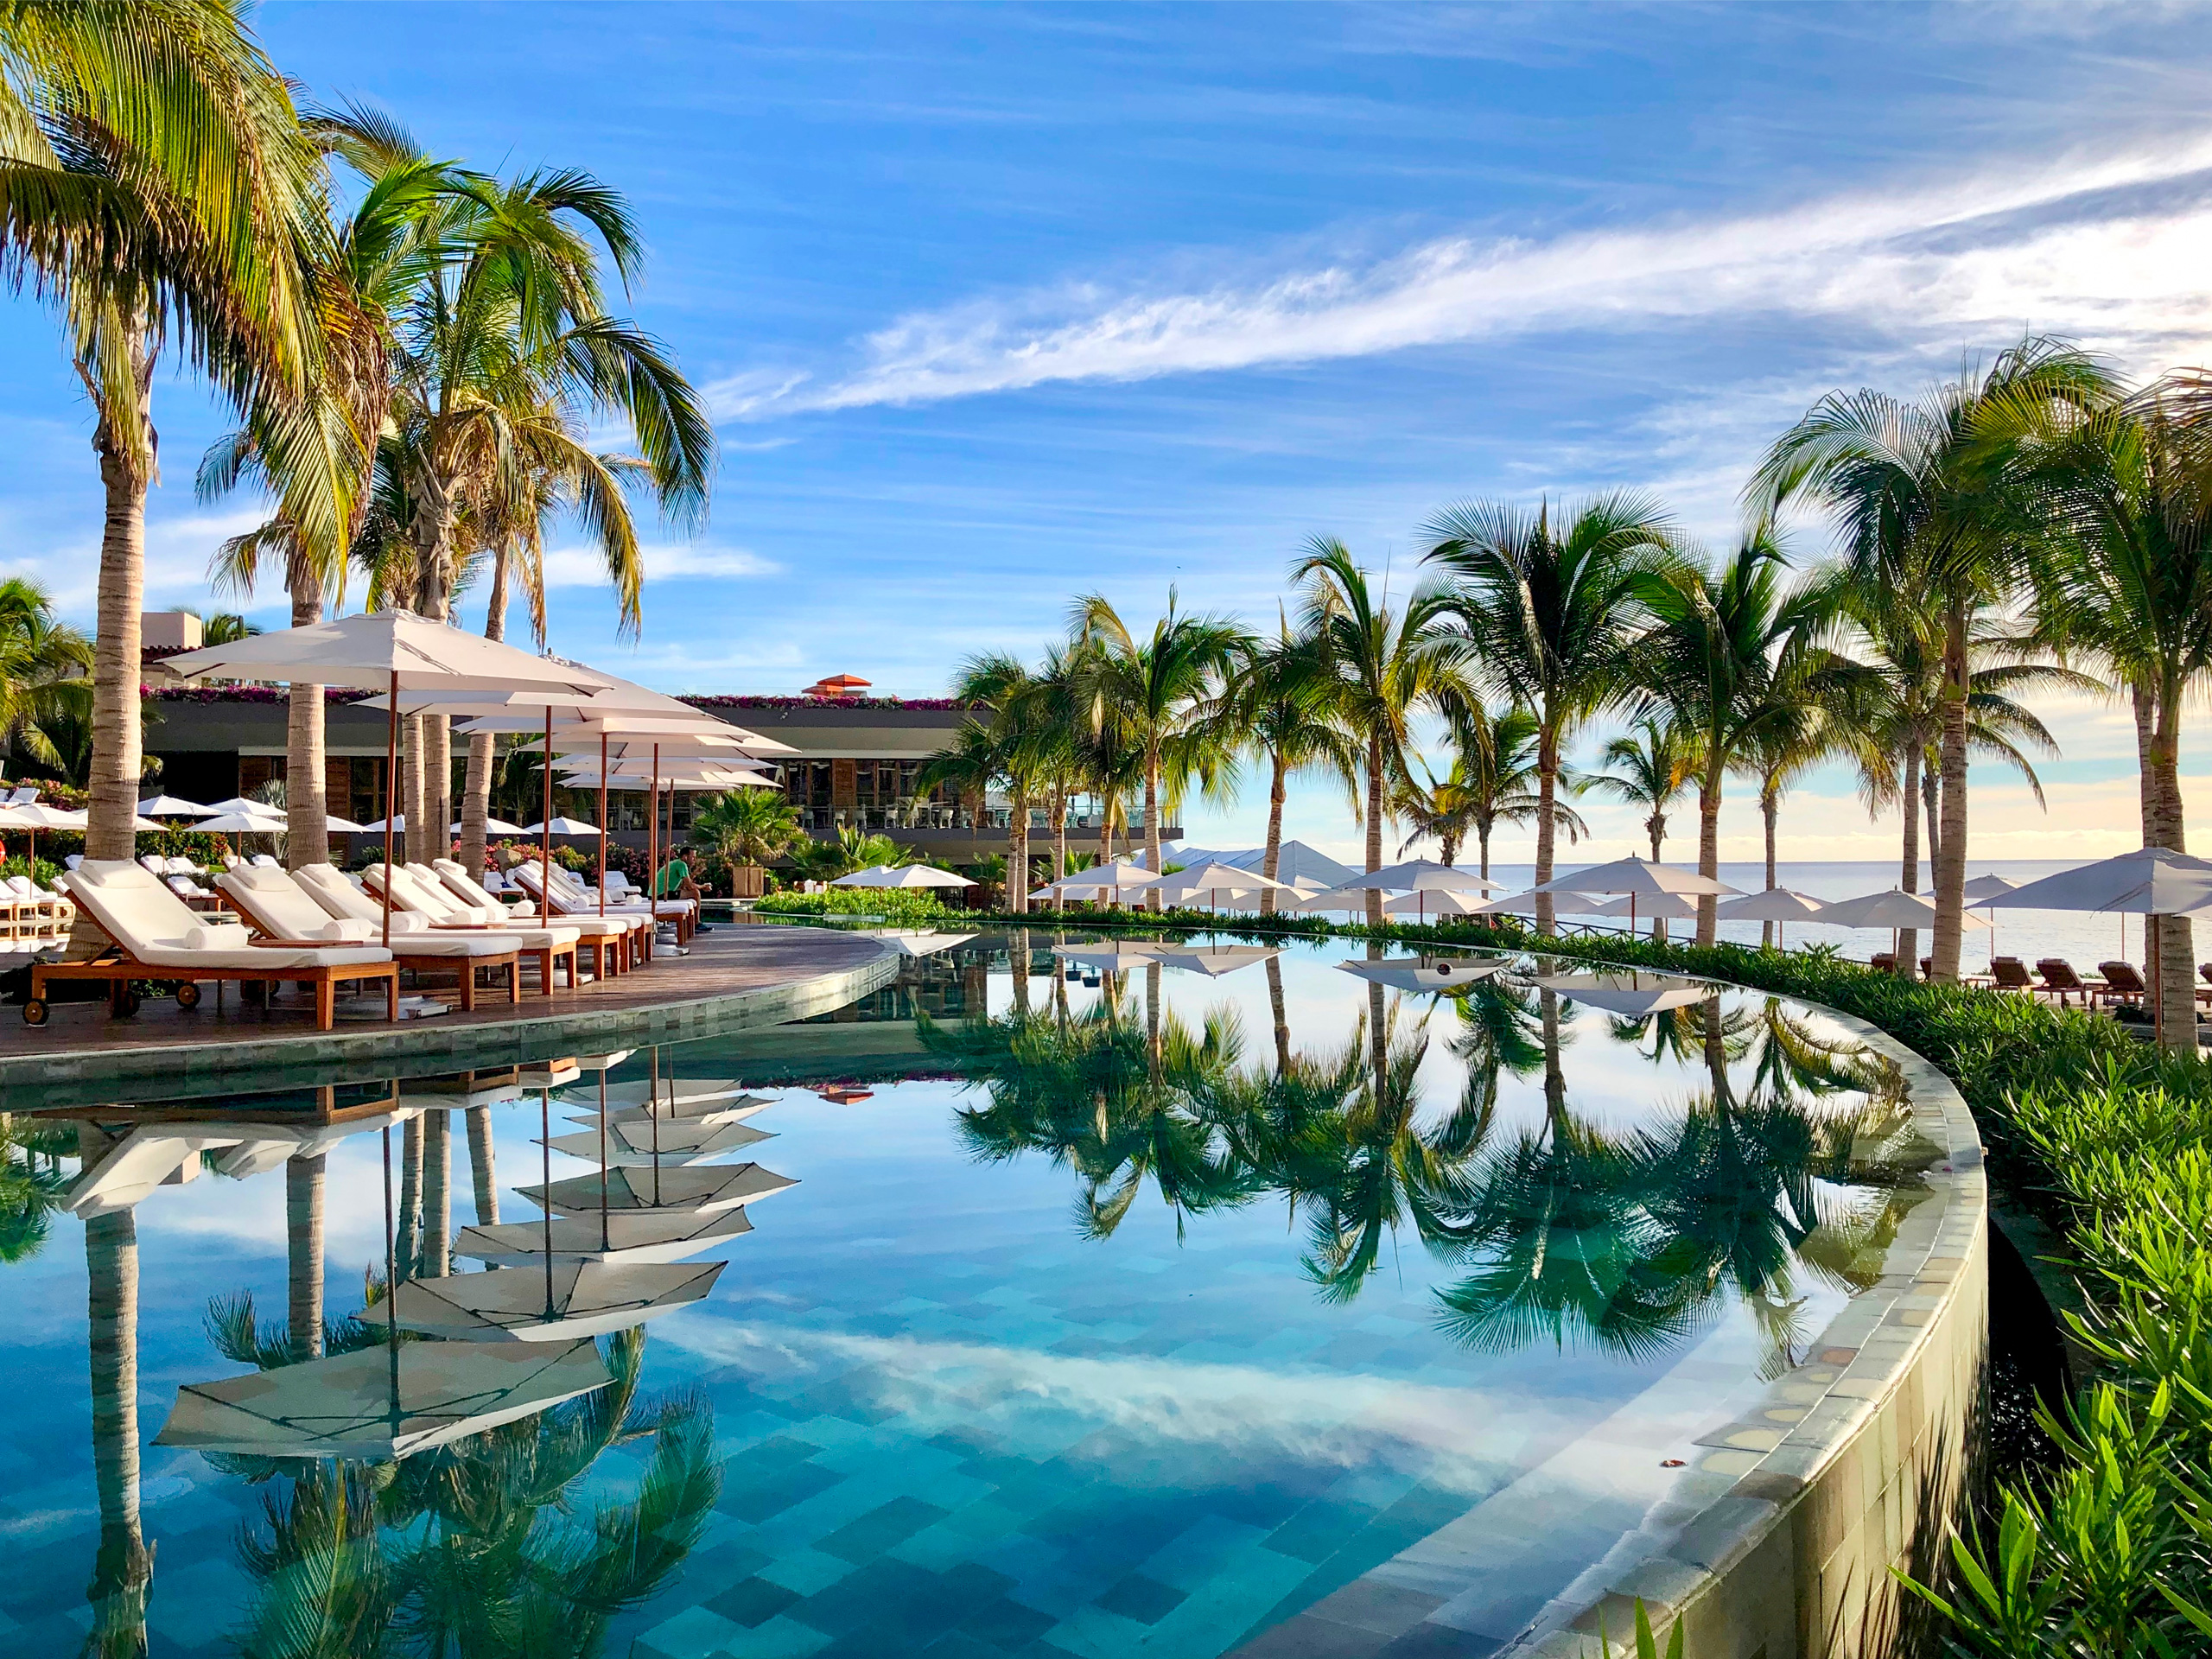 13 Best 13 Diamond All Inclusive Resorts in the Caribbean and Mexico